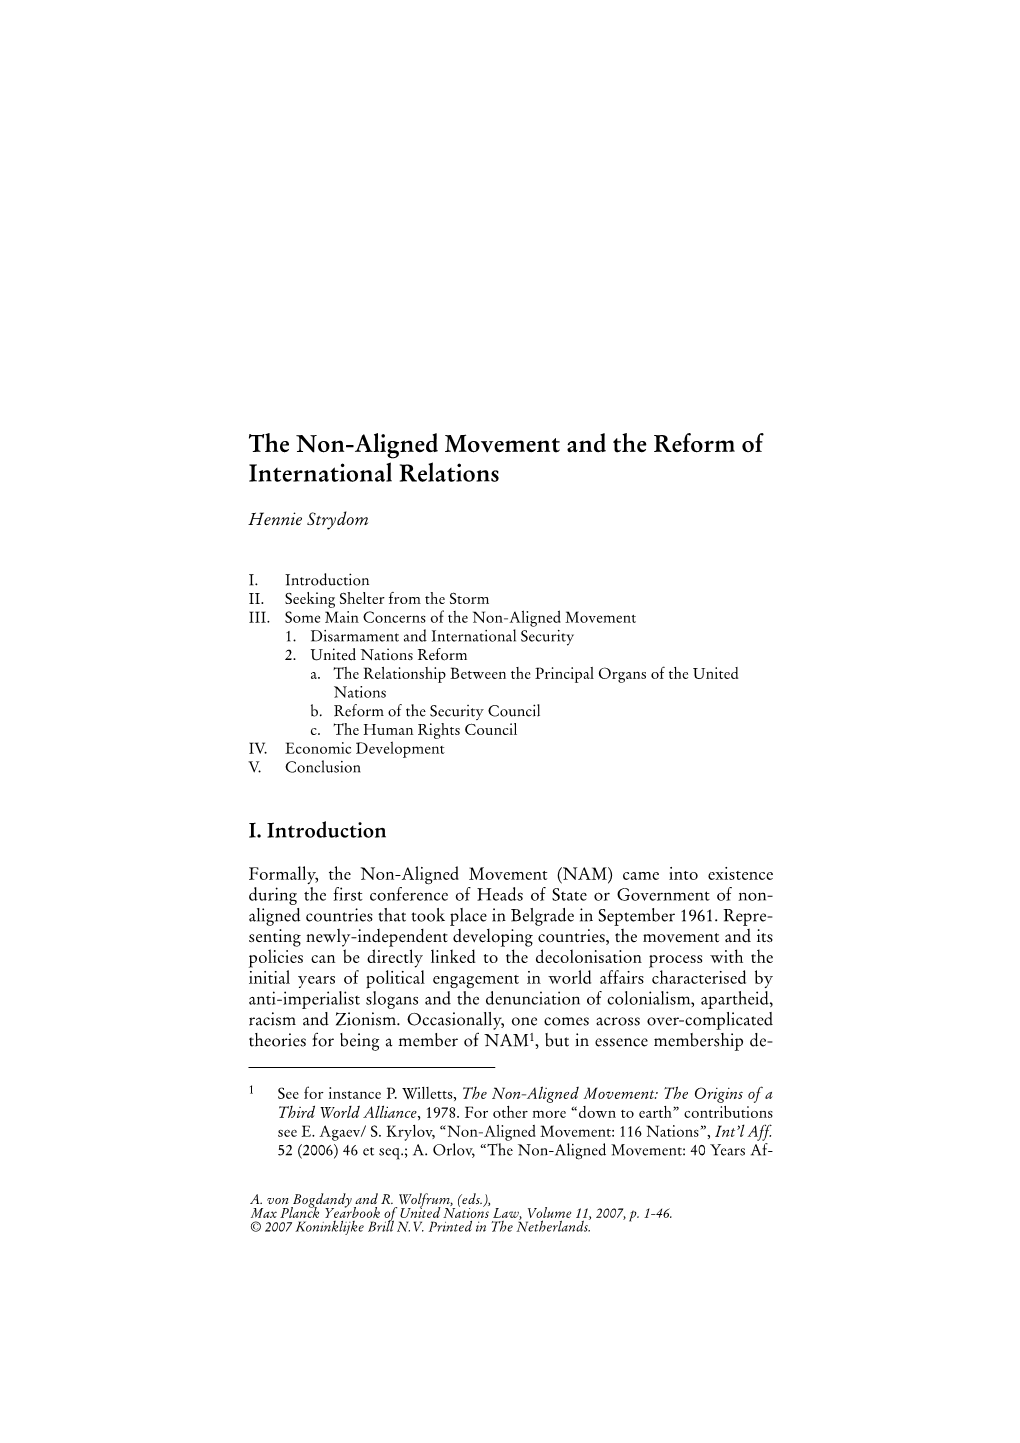 Non-Aligned Movement and the Reform of International Relations